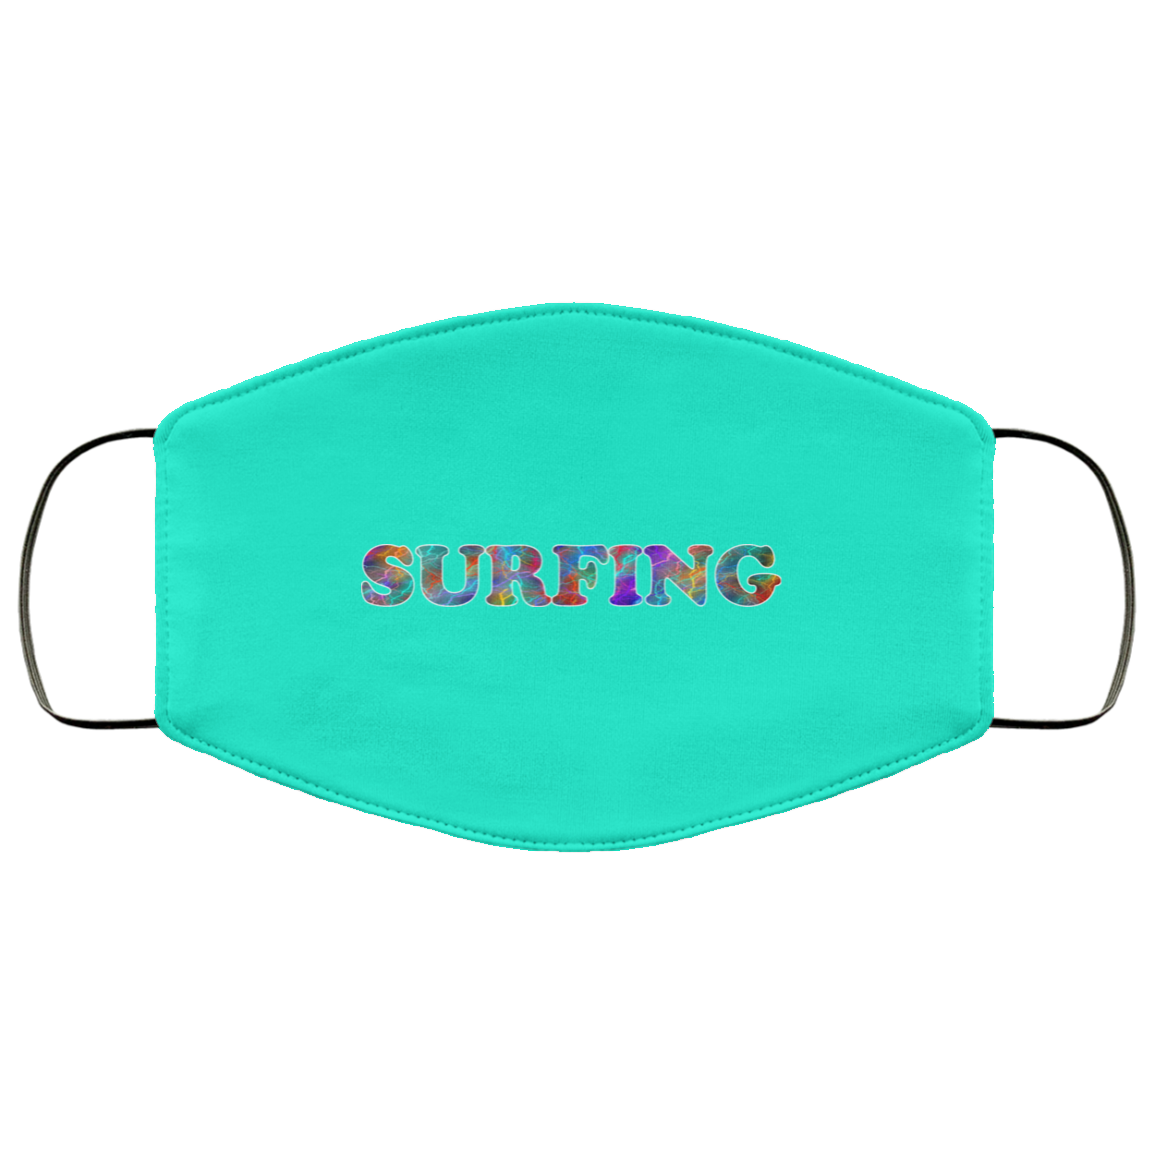 Surfing 2 Layer Protective Mask